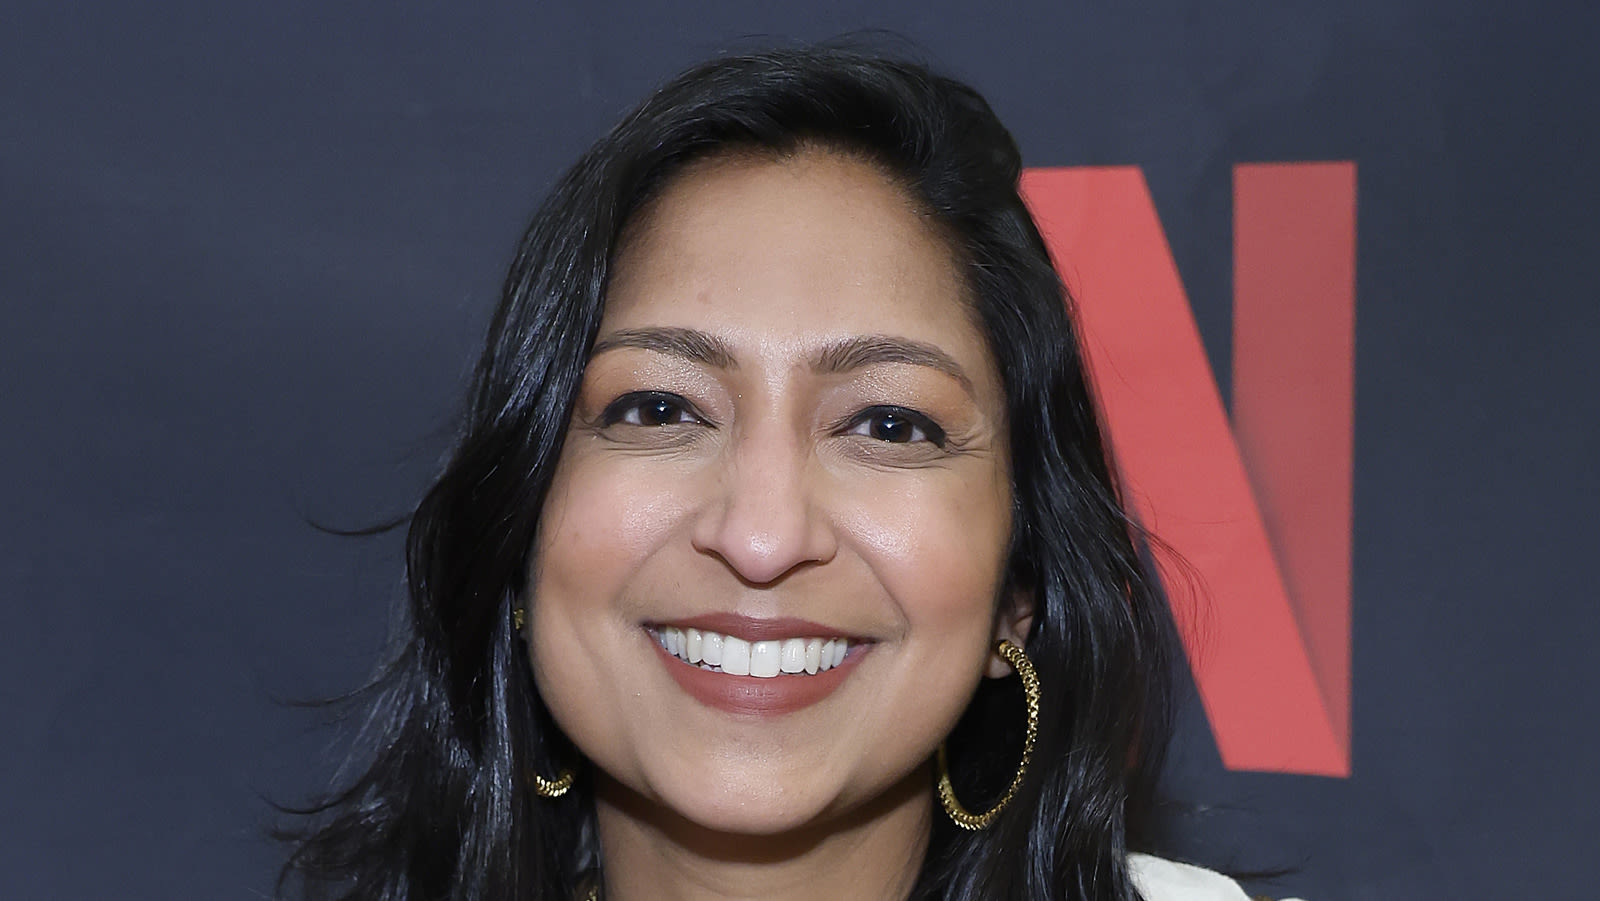 Priya Krishna Talks About The Generational Divide In The New Season Of MasterChef - Exclusive Interview